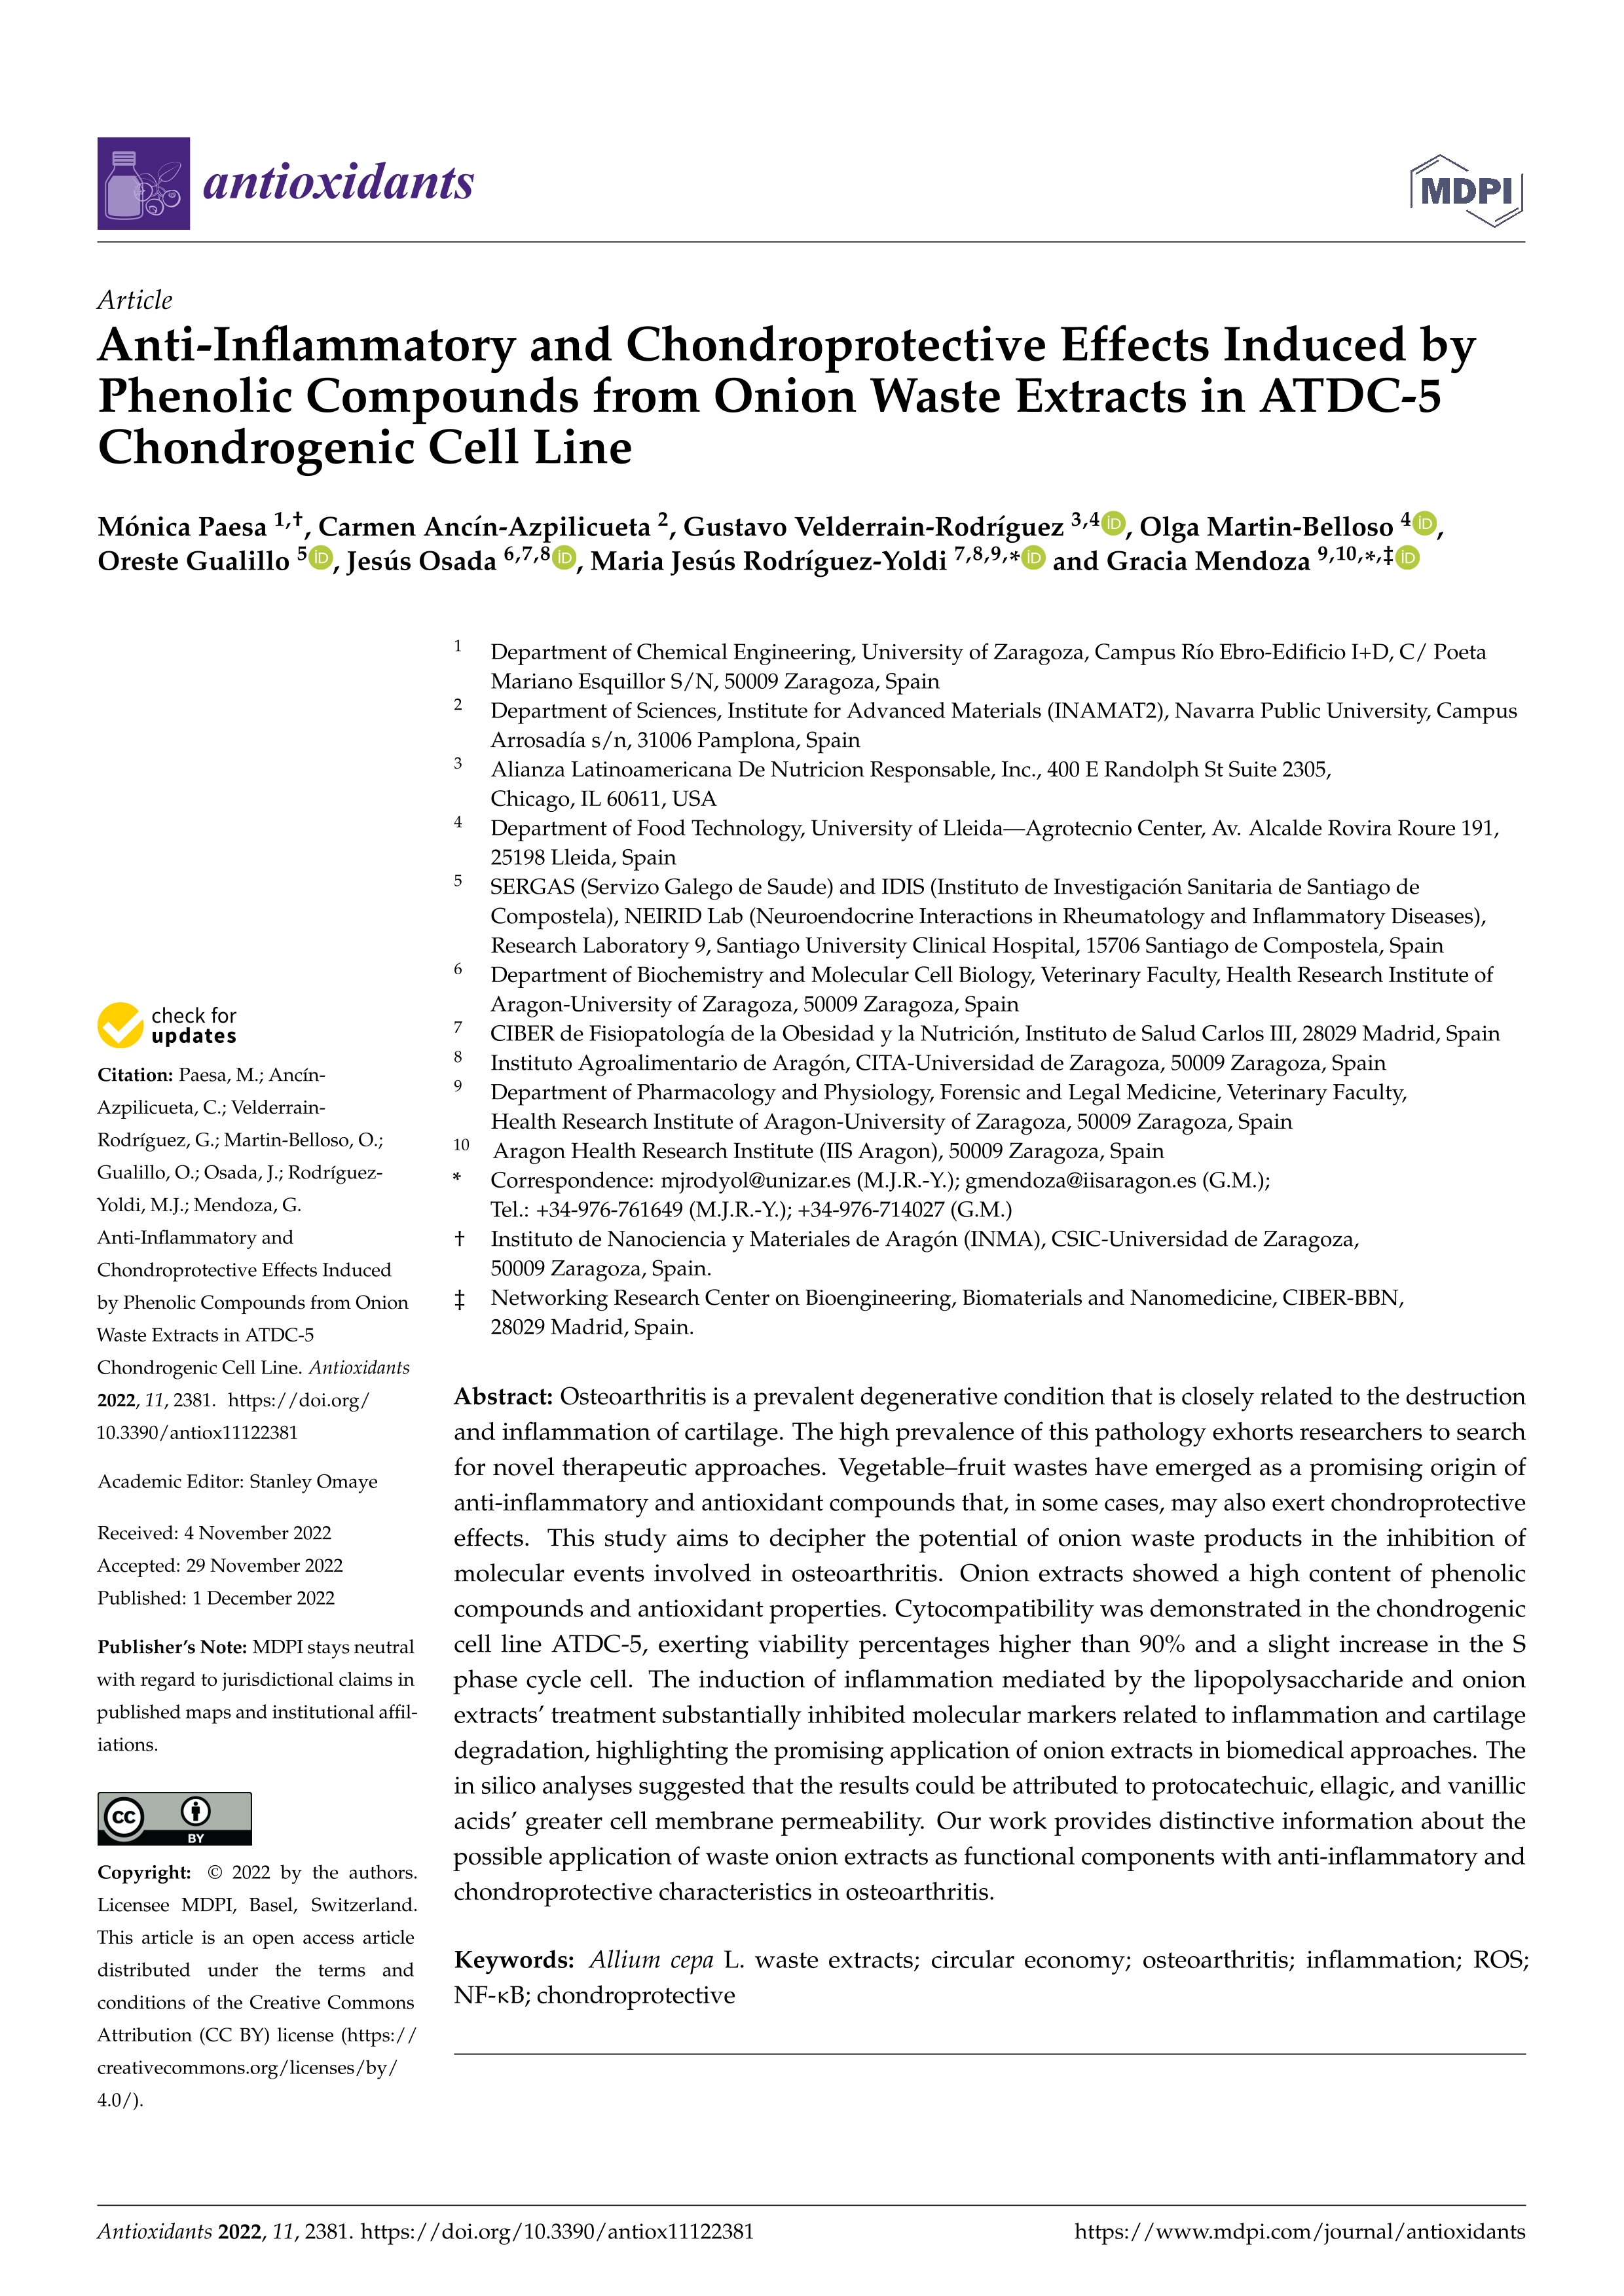 Anti-inflammatory and chondroprotective effects induced by phenolic compounds from onion waste extracts in ATDC-5 chondrogenic cell line